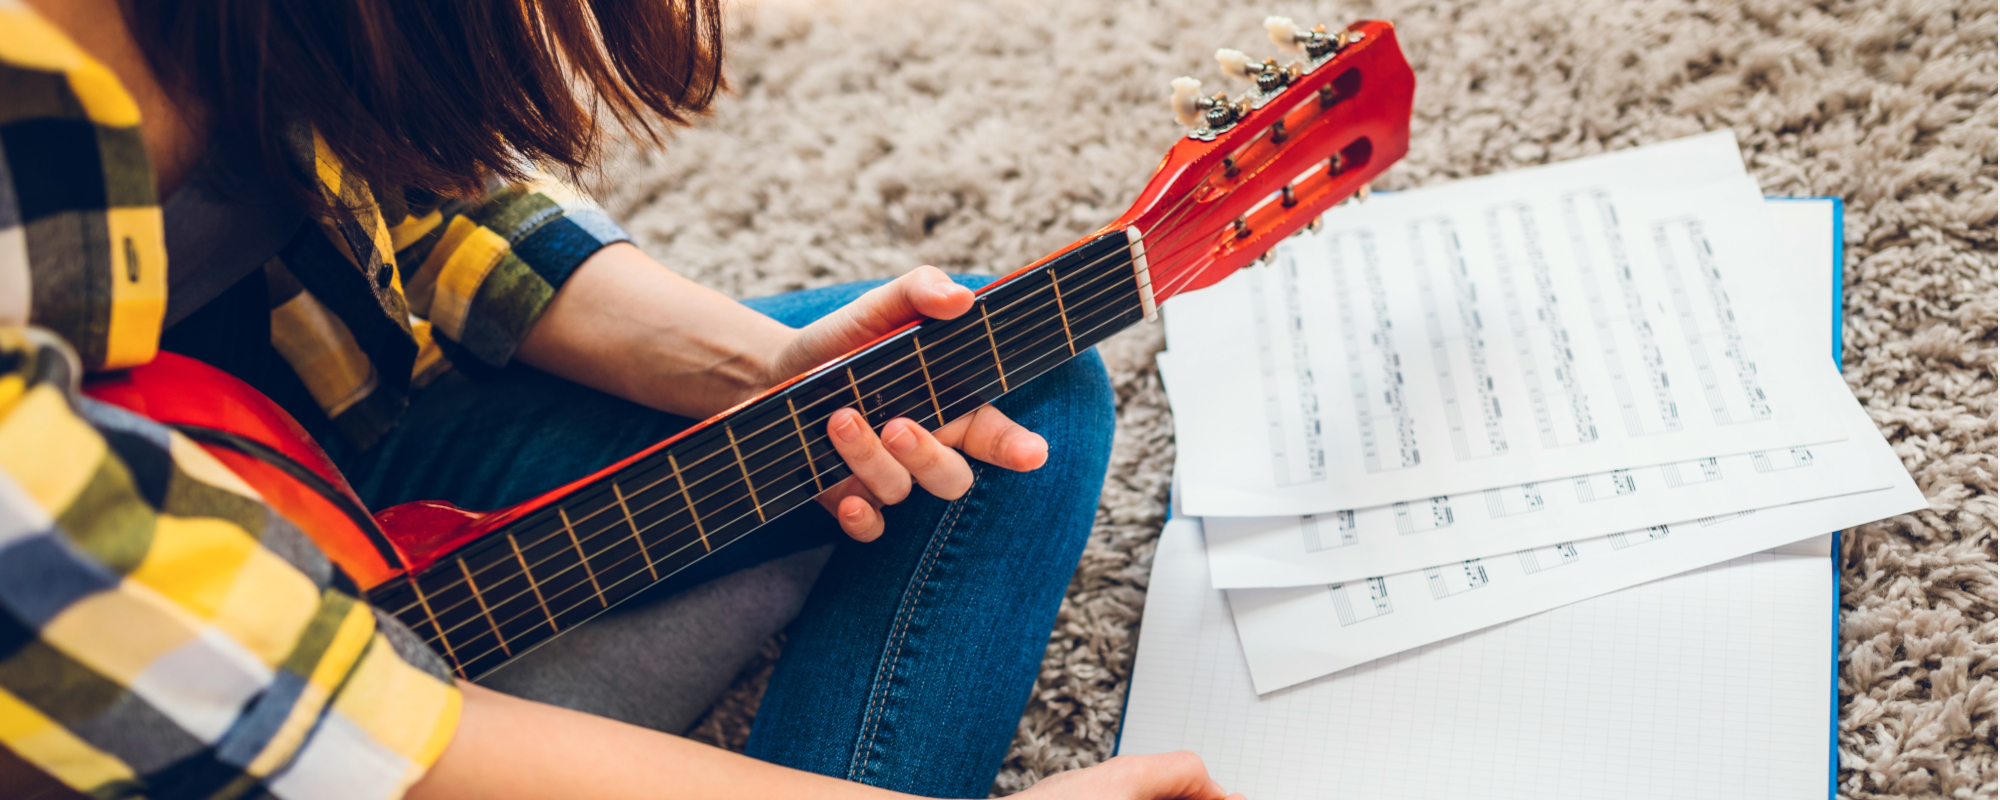 Songwriter U: Classic 4-Chord Progressions for Songwriting